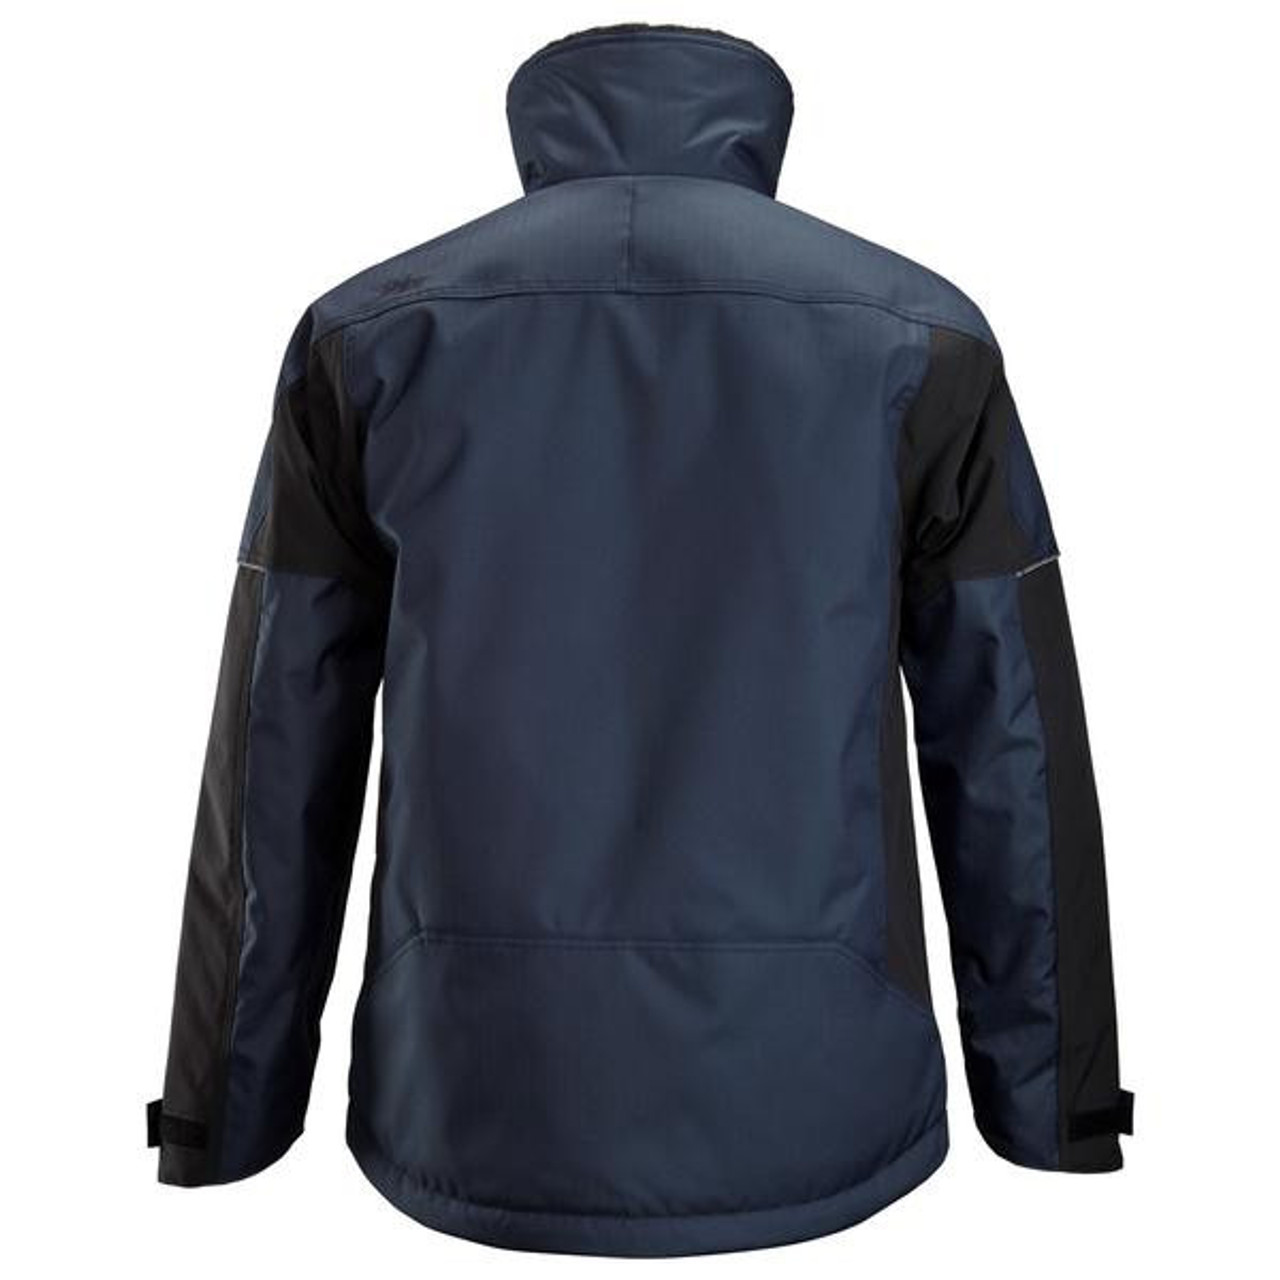 SNICKERS Jackets | Mens 1148 Navy Blue Lined Winter Jackets with Insulation-SALE